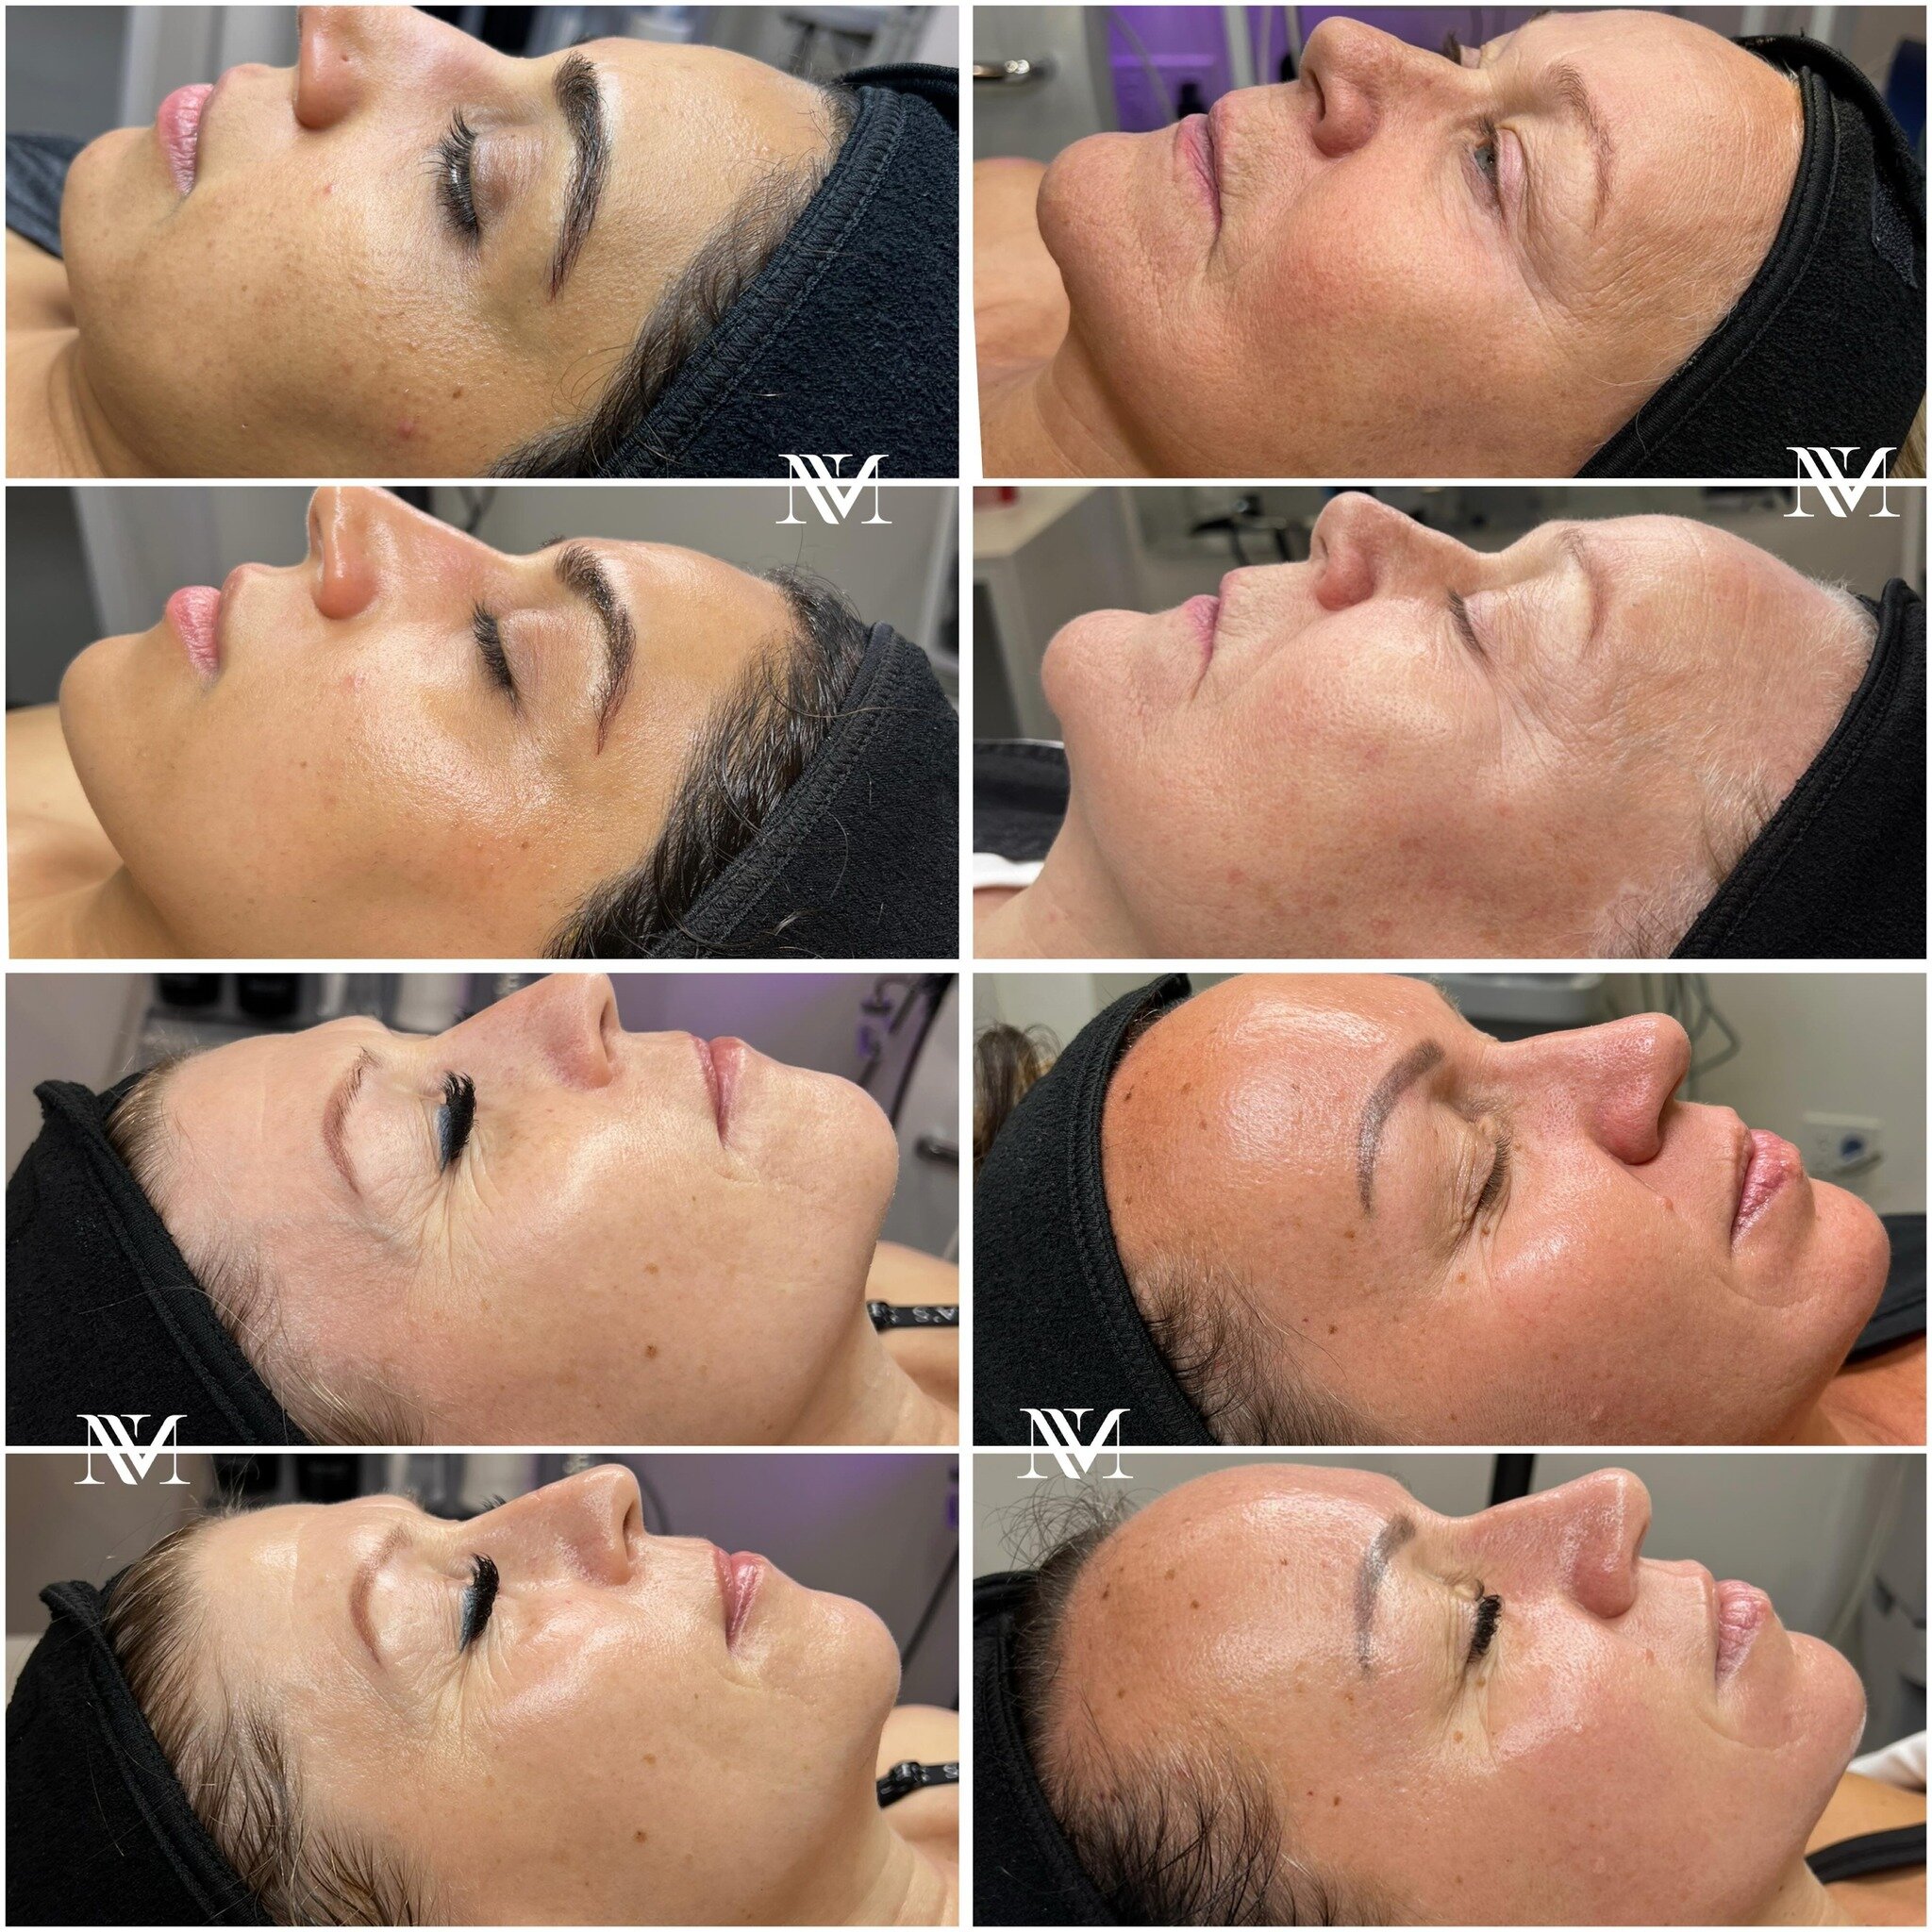 ✨Creating Beautiful Face With Lasting Results!✨

Our commitment is to always give our clients the finest standard of professional care in a private, welcoming environment. Rather than simply offering a service, we go above and beyond to make sure eac